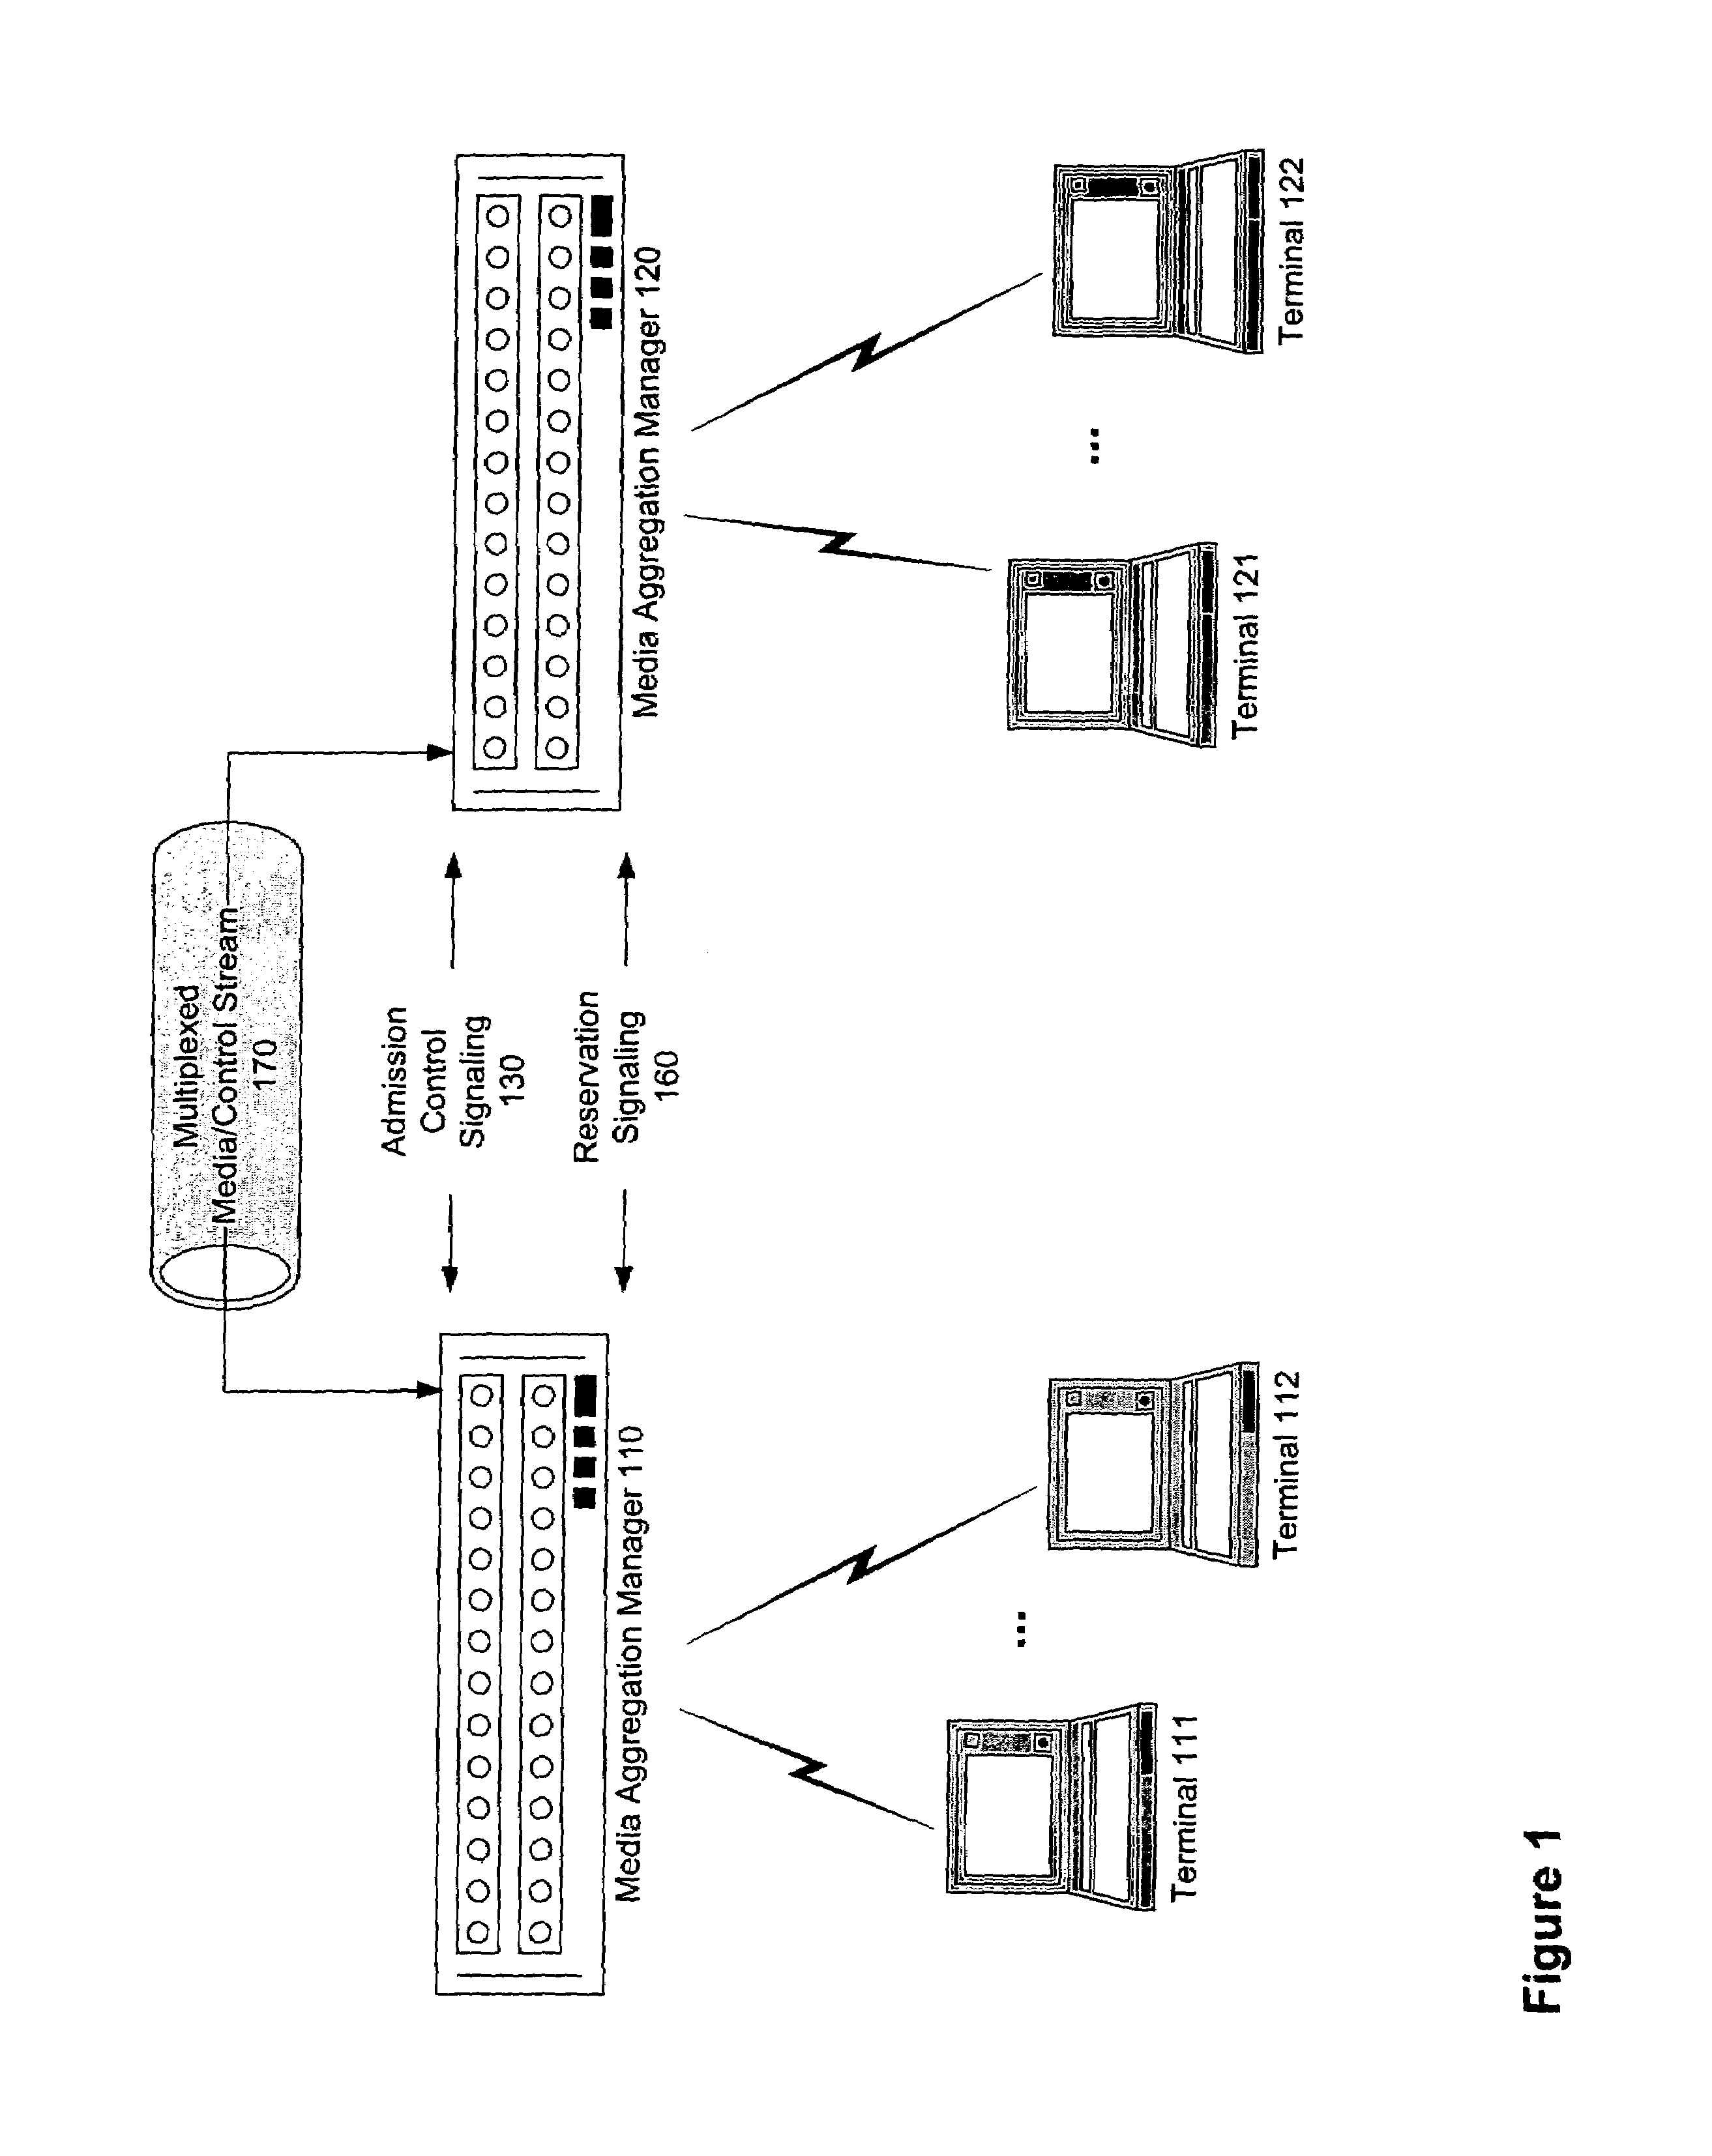 Multiplexing several individual application sessions over a pre-allocated reservation protocol session